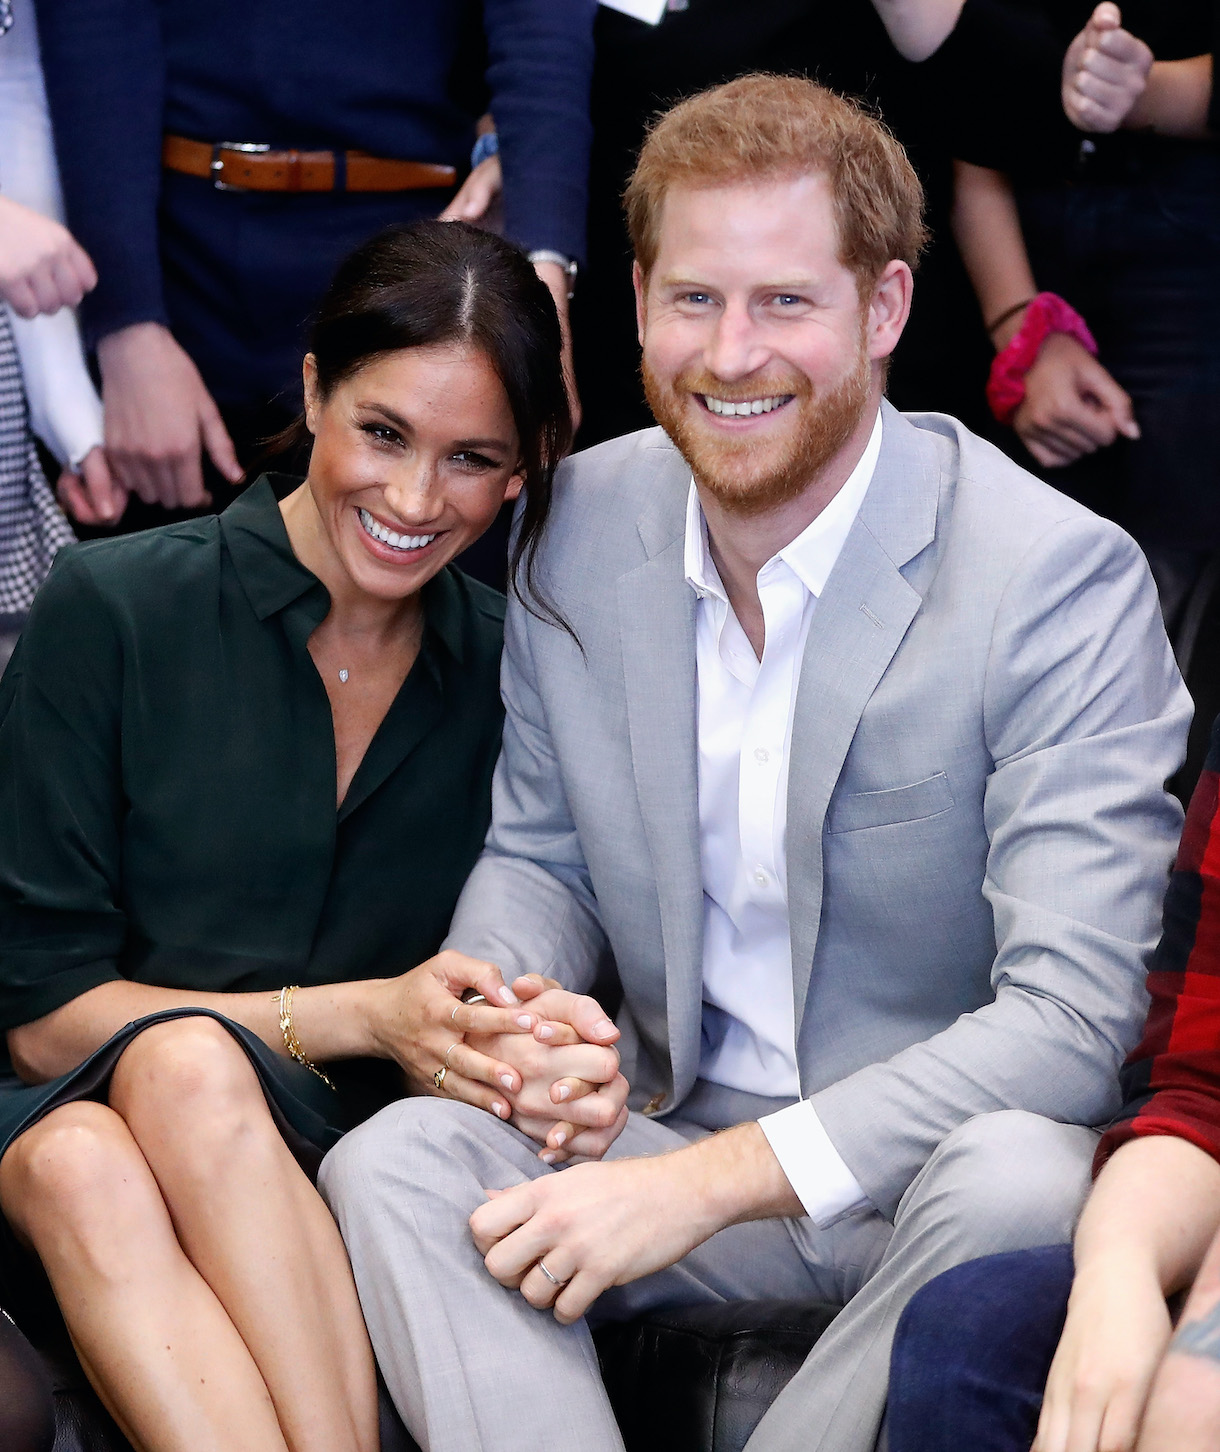 Prince Harry and Meghan Markle Won’t ‘Come Crawling Back’ to Royal Roles, Expert Says